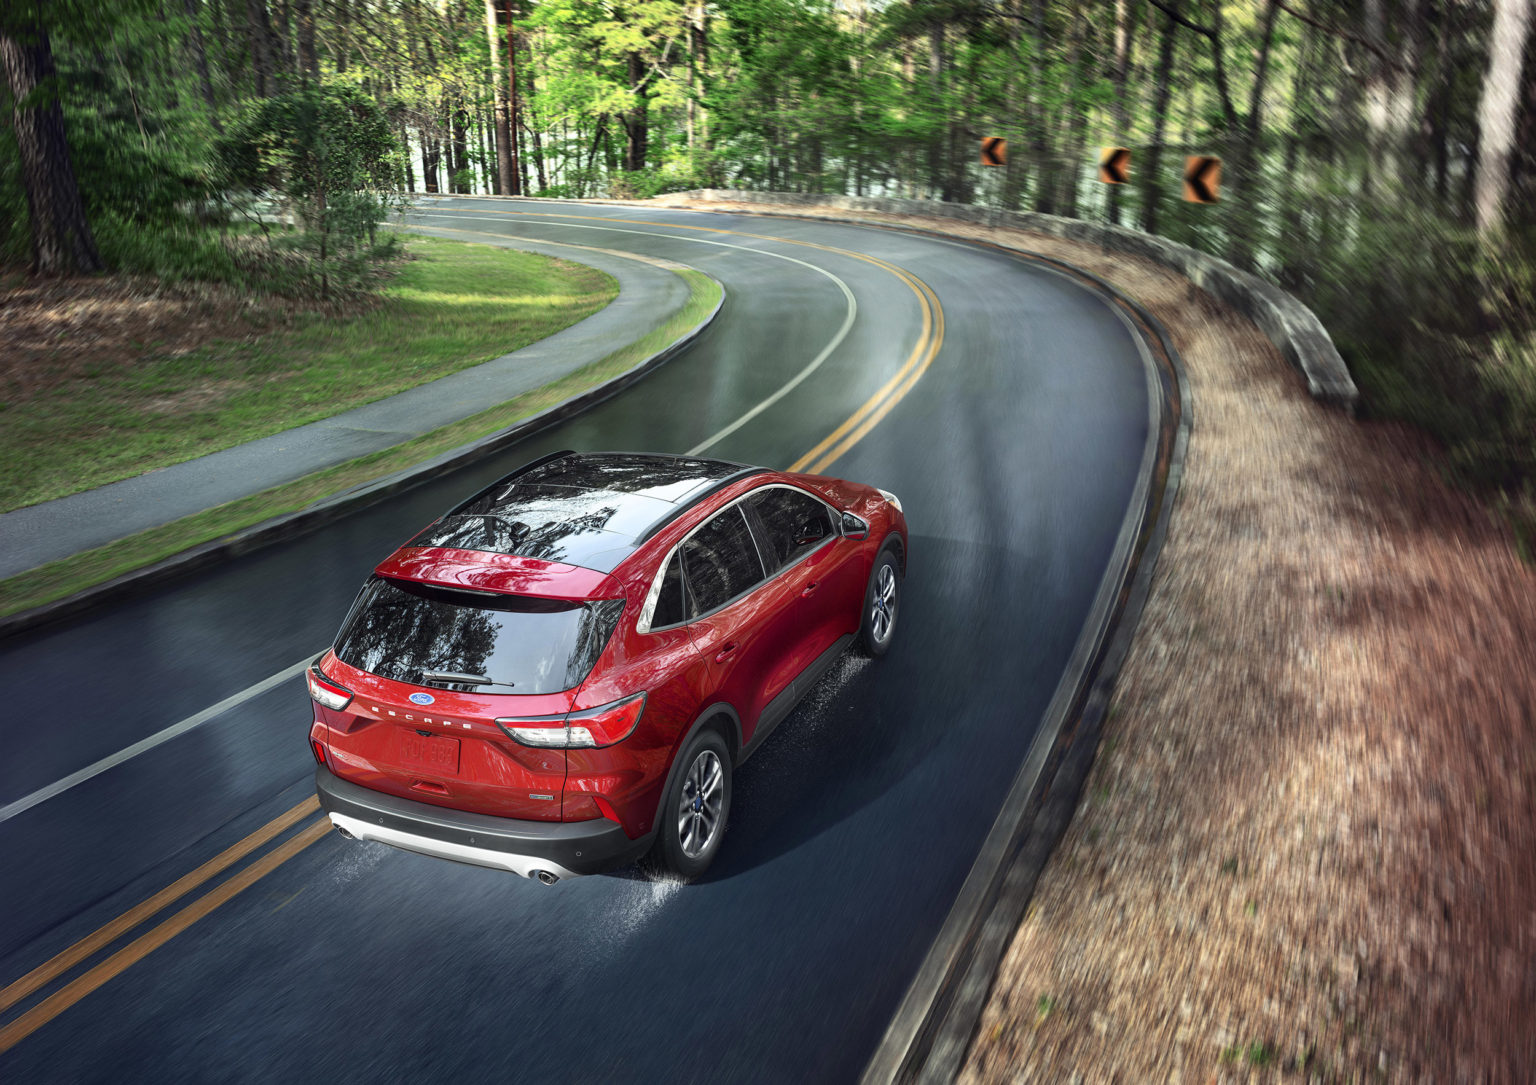 The Ford Escape has been completely redesigned for the 2020 model year.